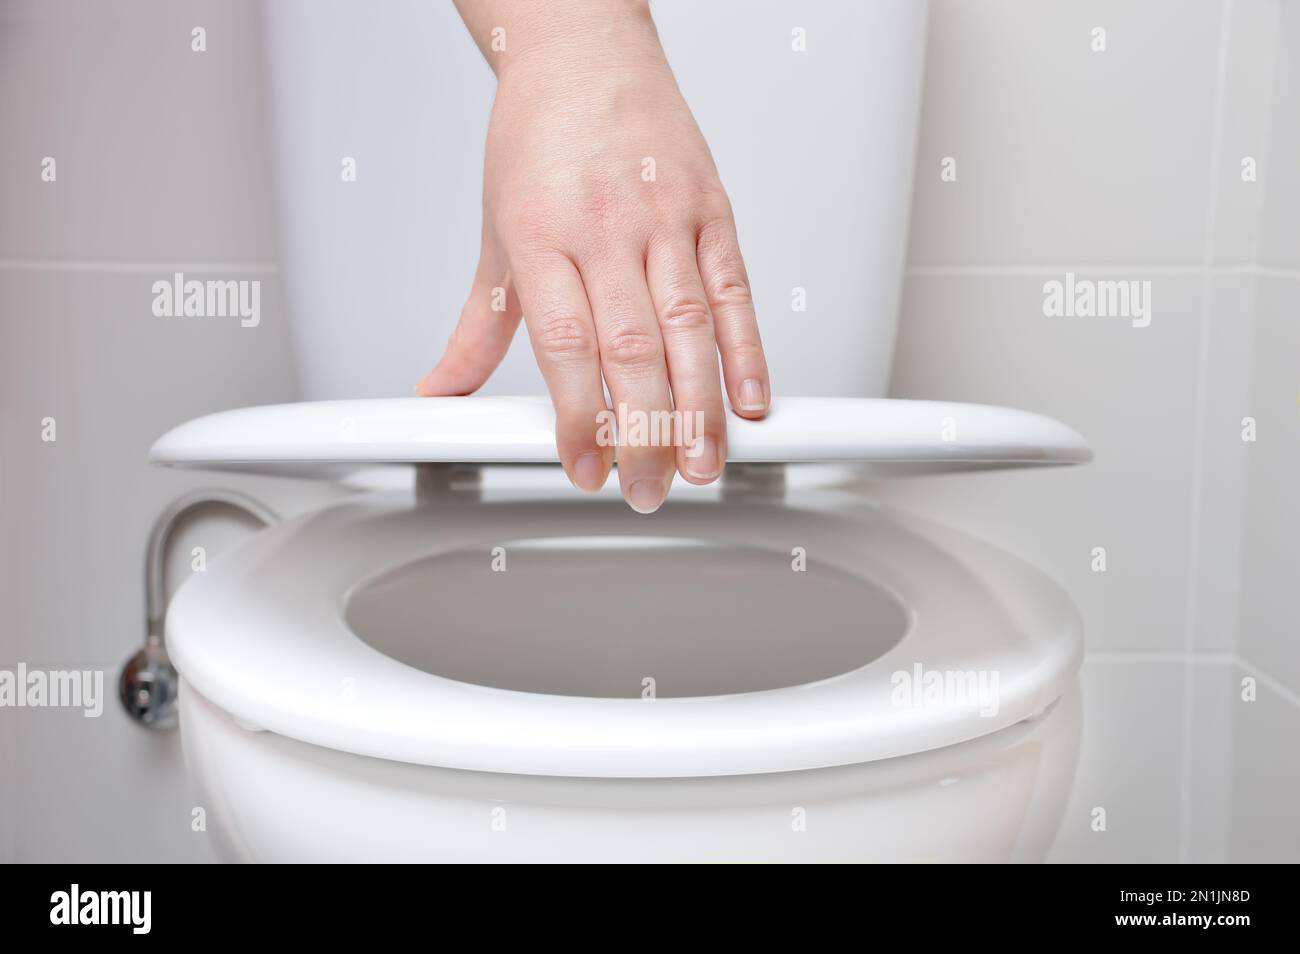 hand of a woman closing the lid of a toilet Stock Photo